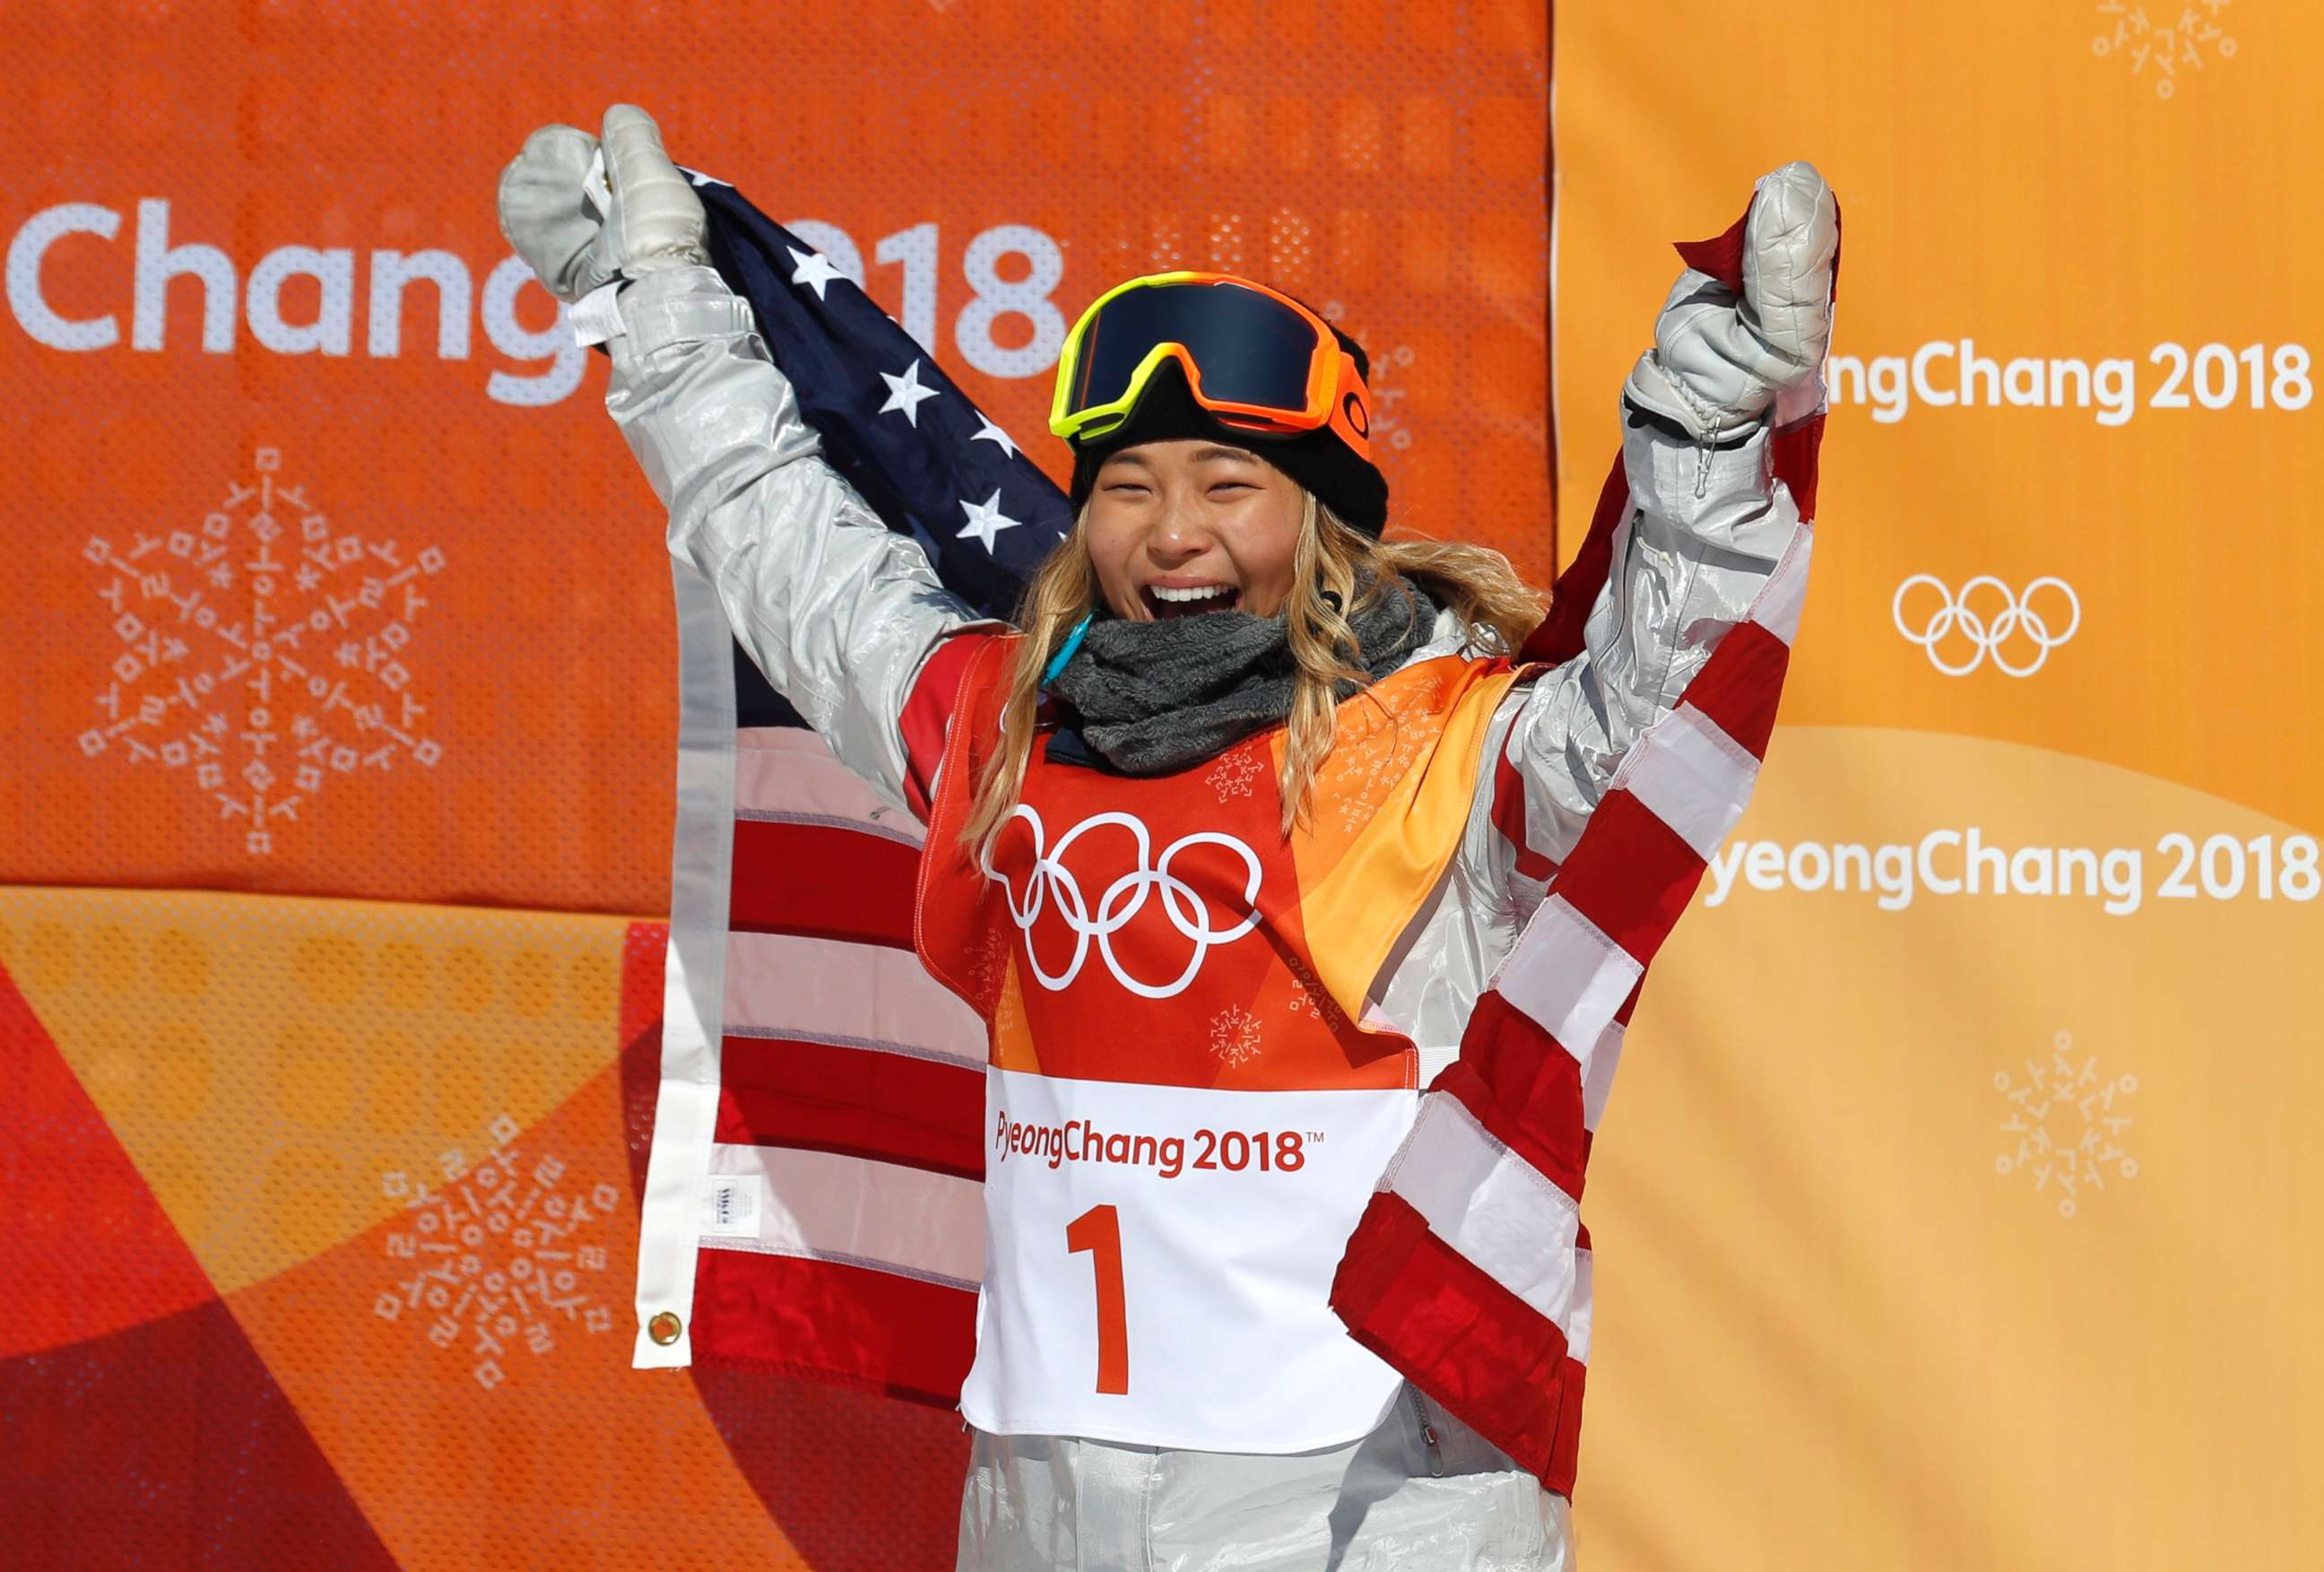 PHOTO: Chloe Kim wins the gold for the women's halfpipe finals snowboarding competition in Phoenix Snow Park during the Pyeongchang 2018 Winter Olympics, Feb. 13, 2018, in Pyeongchang, South Korea. 